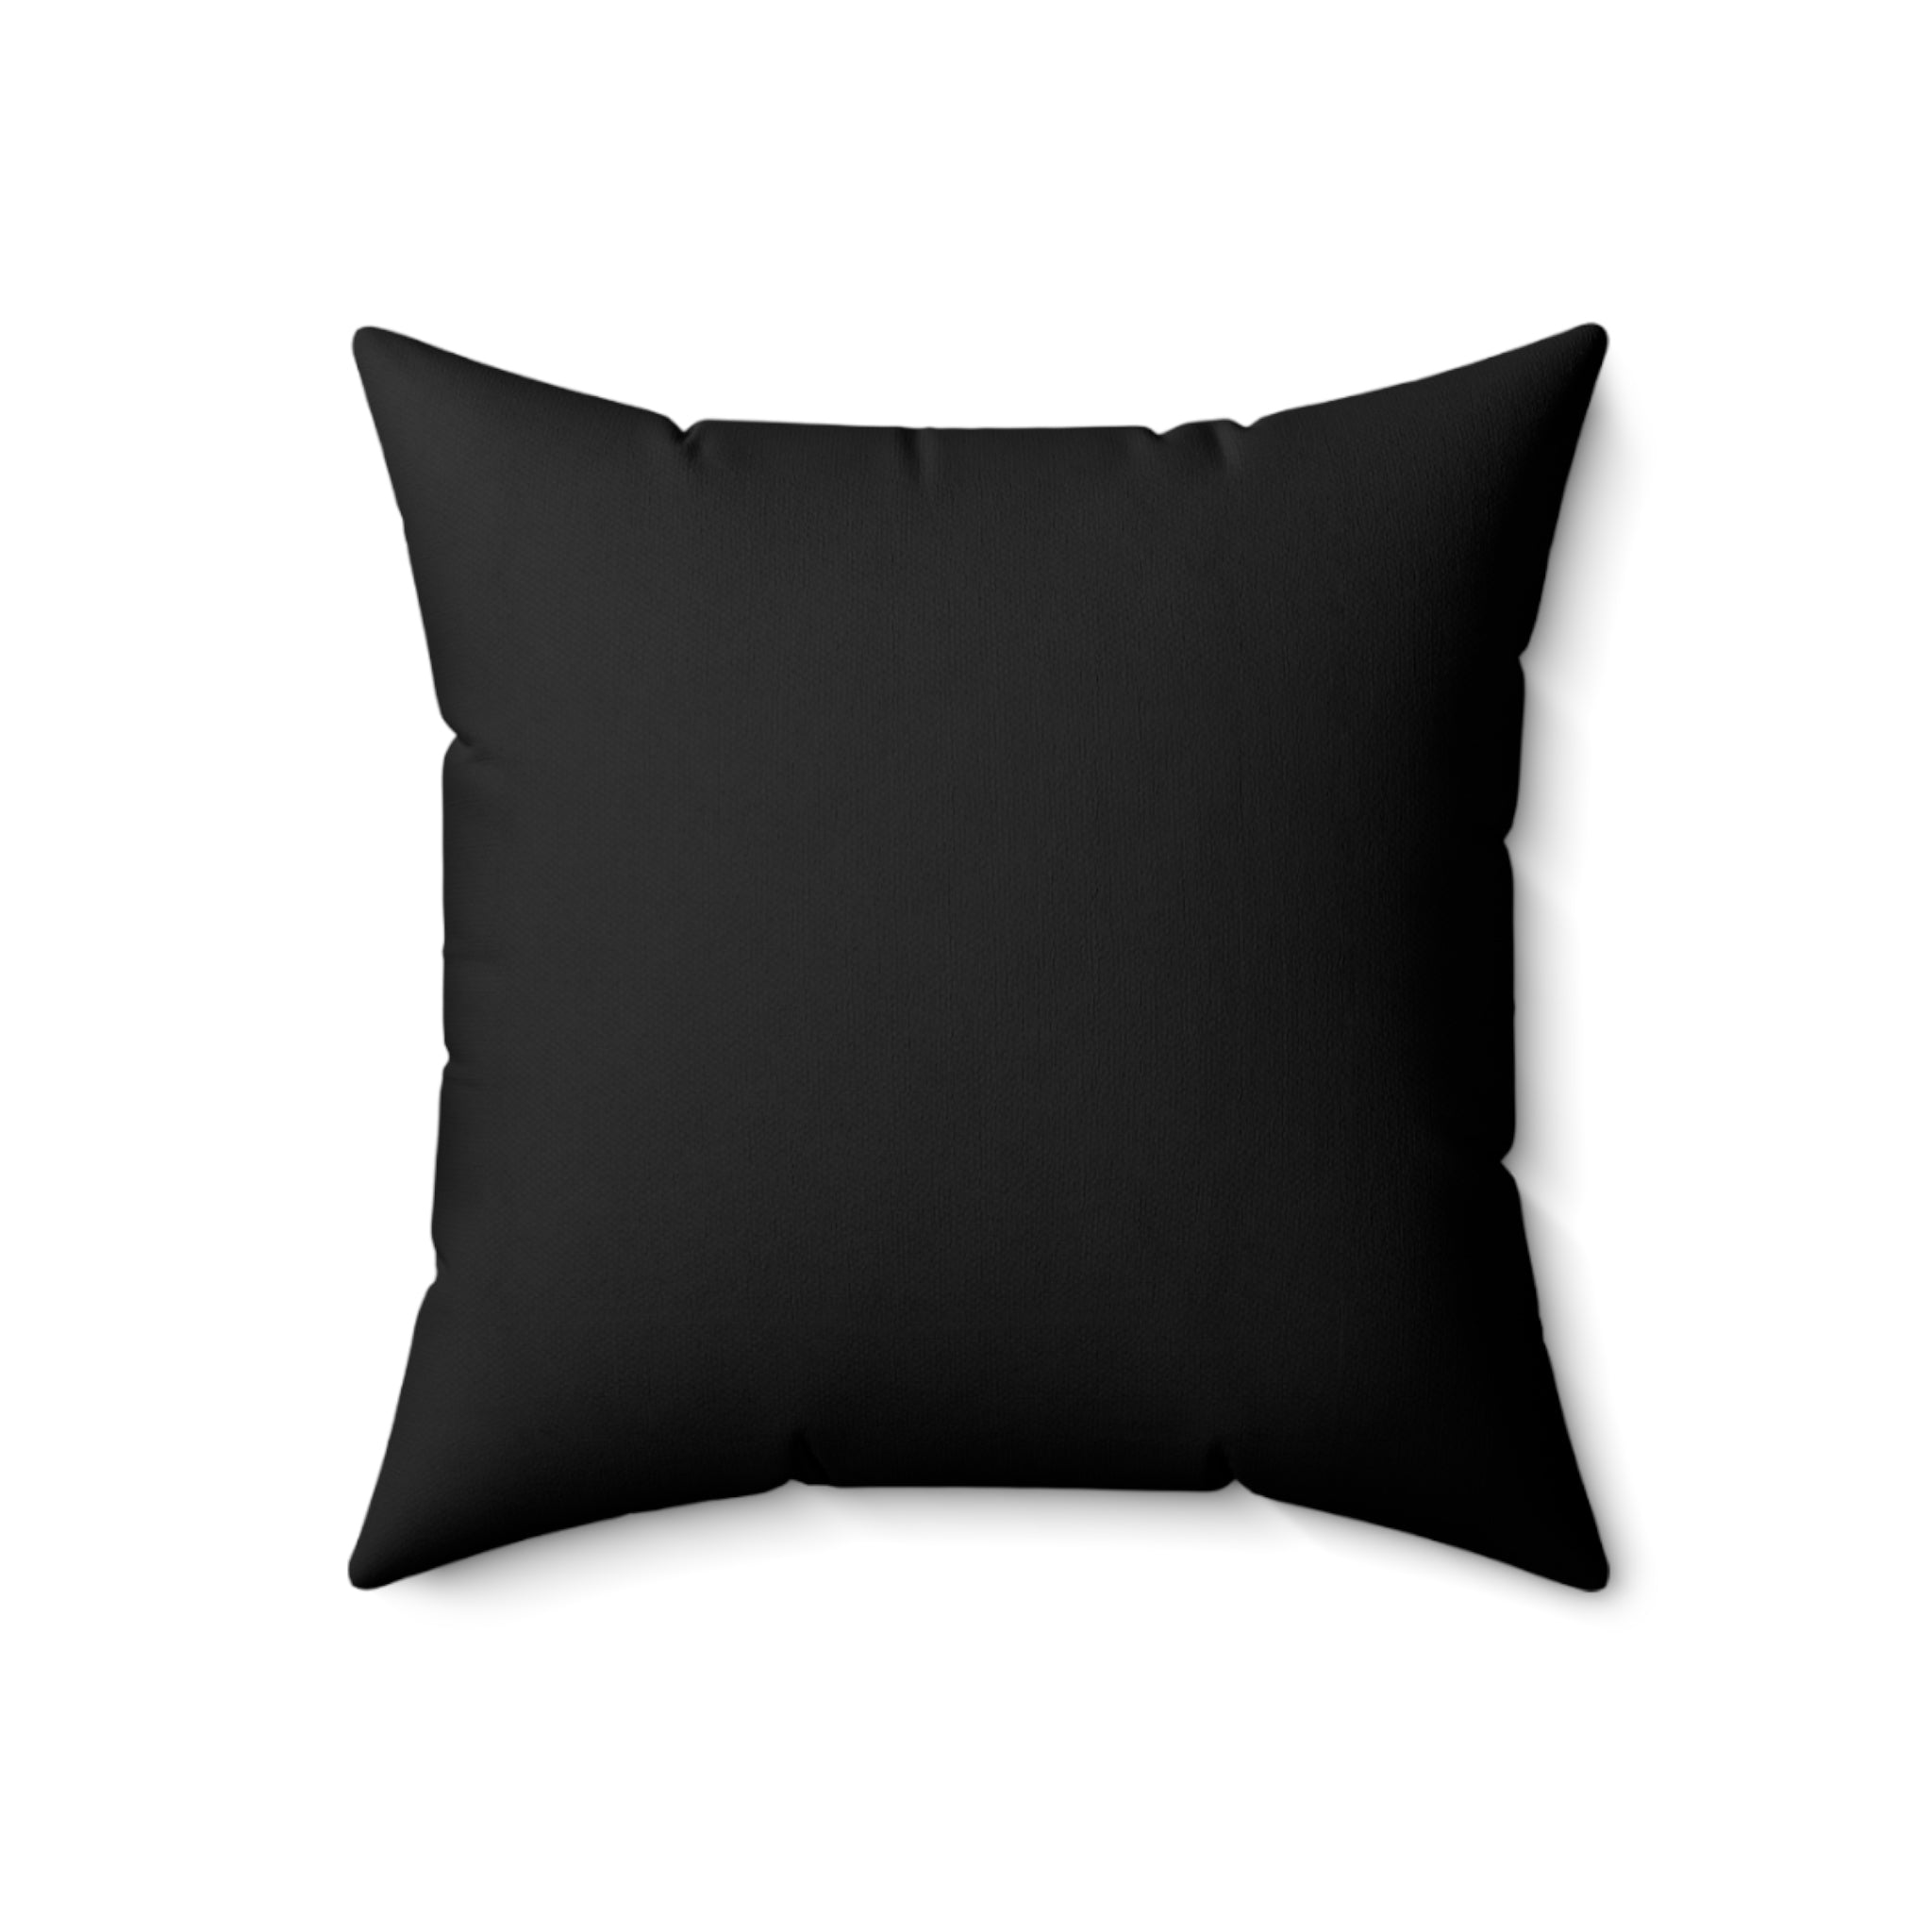 Phantom Butterfly Faux Suede Pillow Cover: Black and White